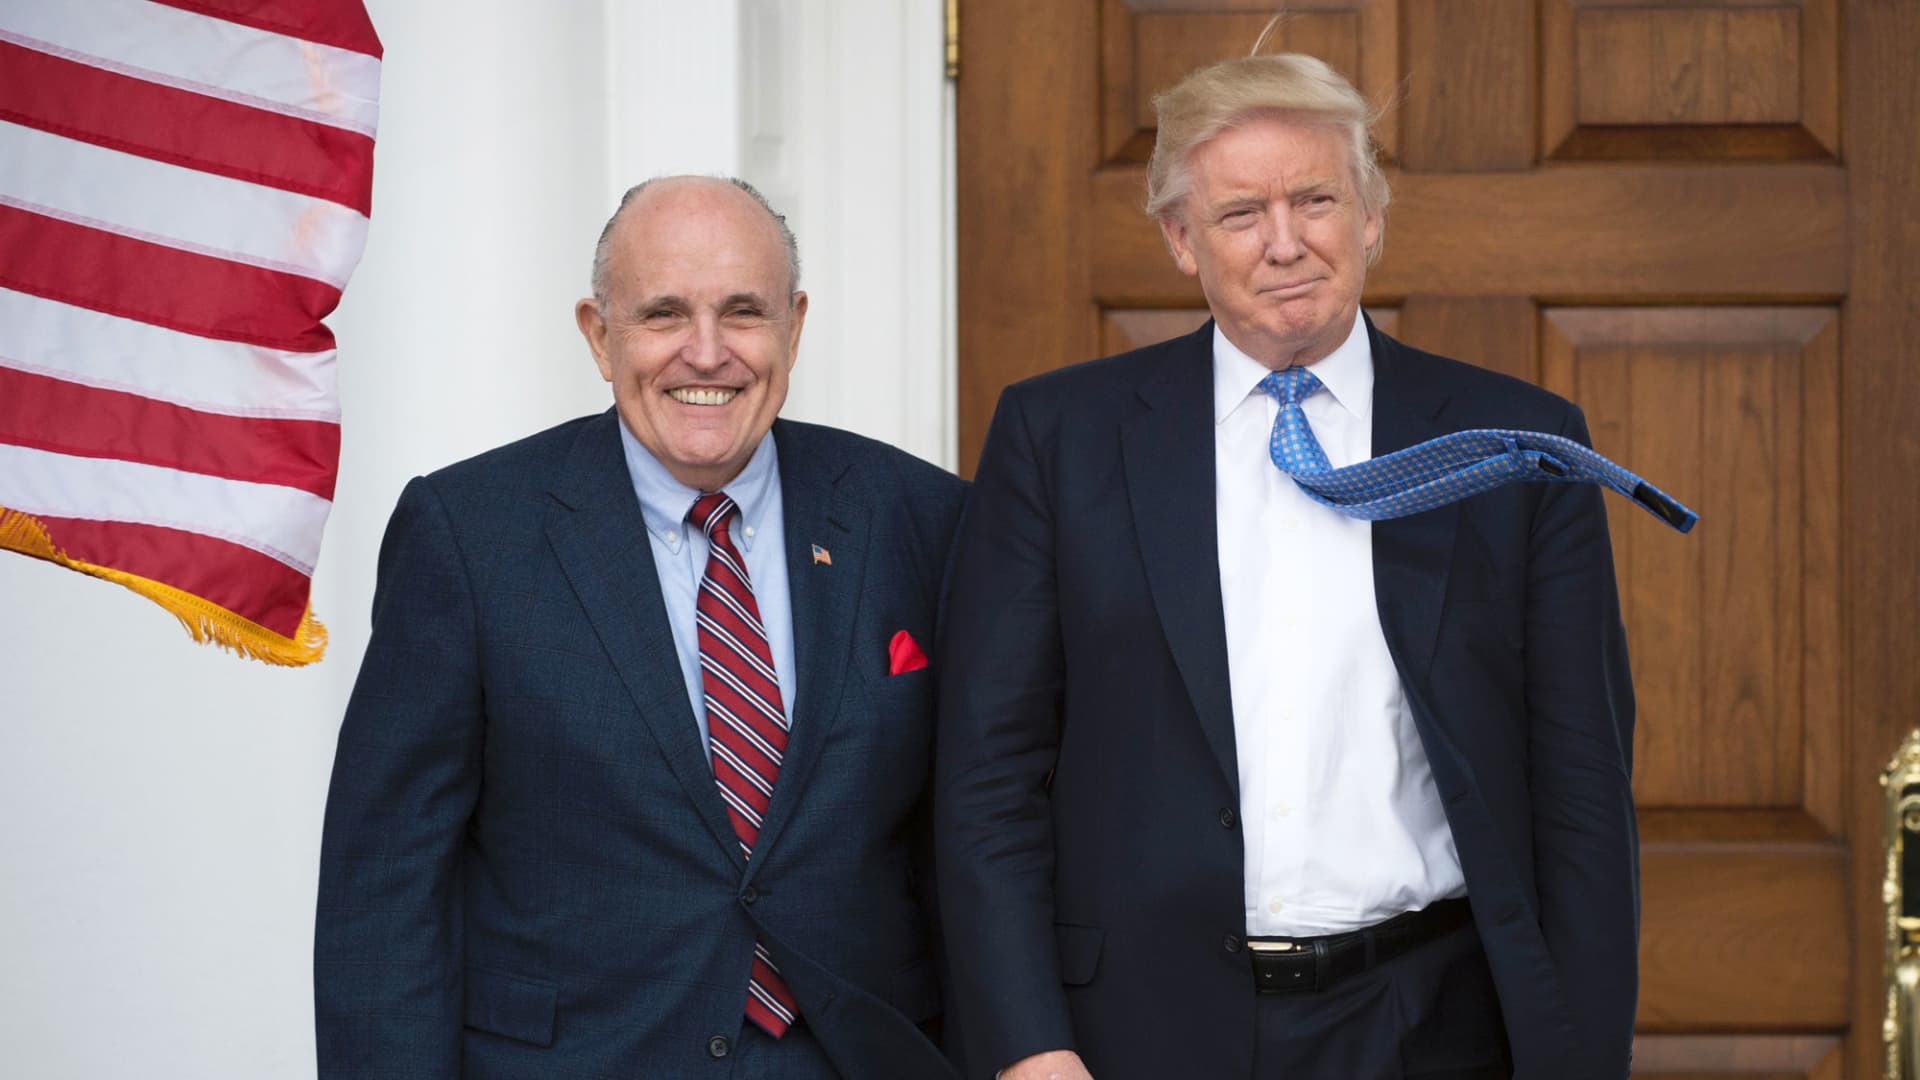 Then-President-elect Donald Trump meets with former New York City Mayor Rudy Giuliani at the clubhouse of Trump National Golf Club November 20, 2016 in Bedminster, New Jersey.